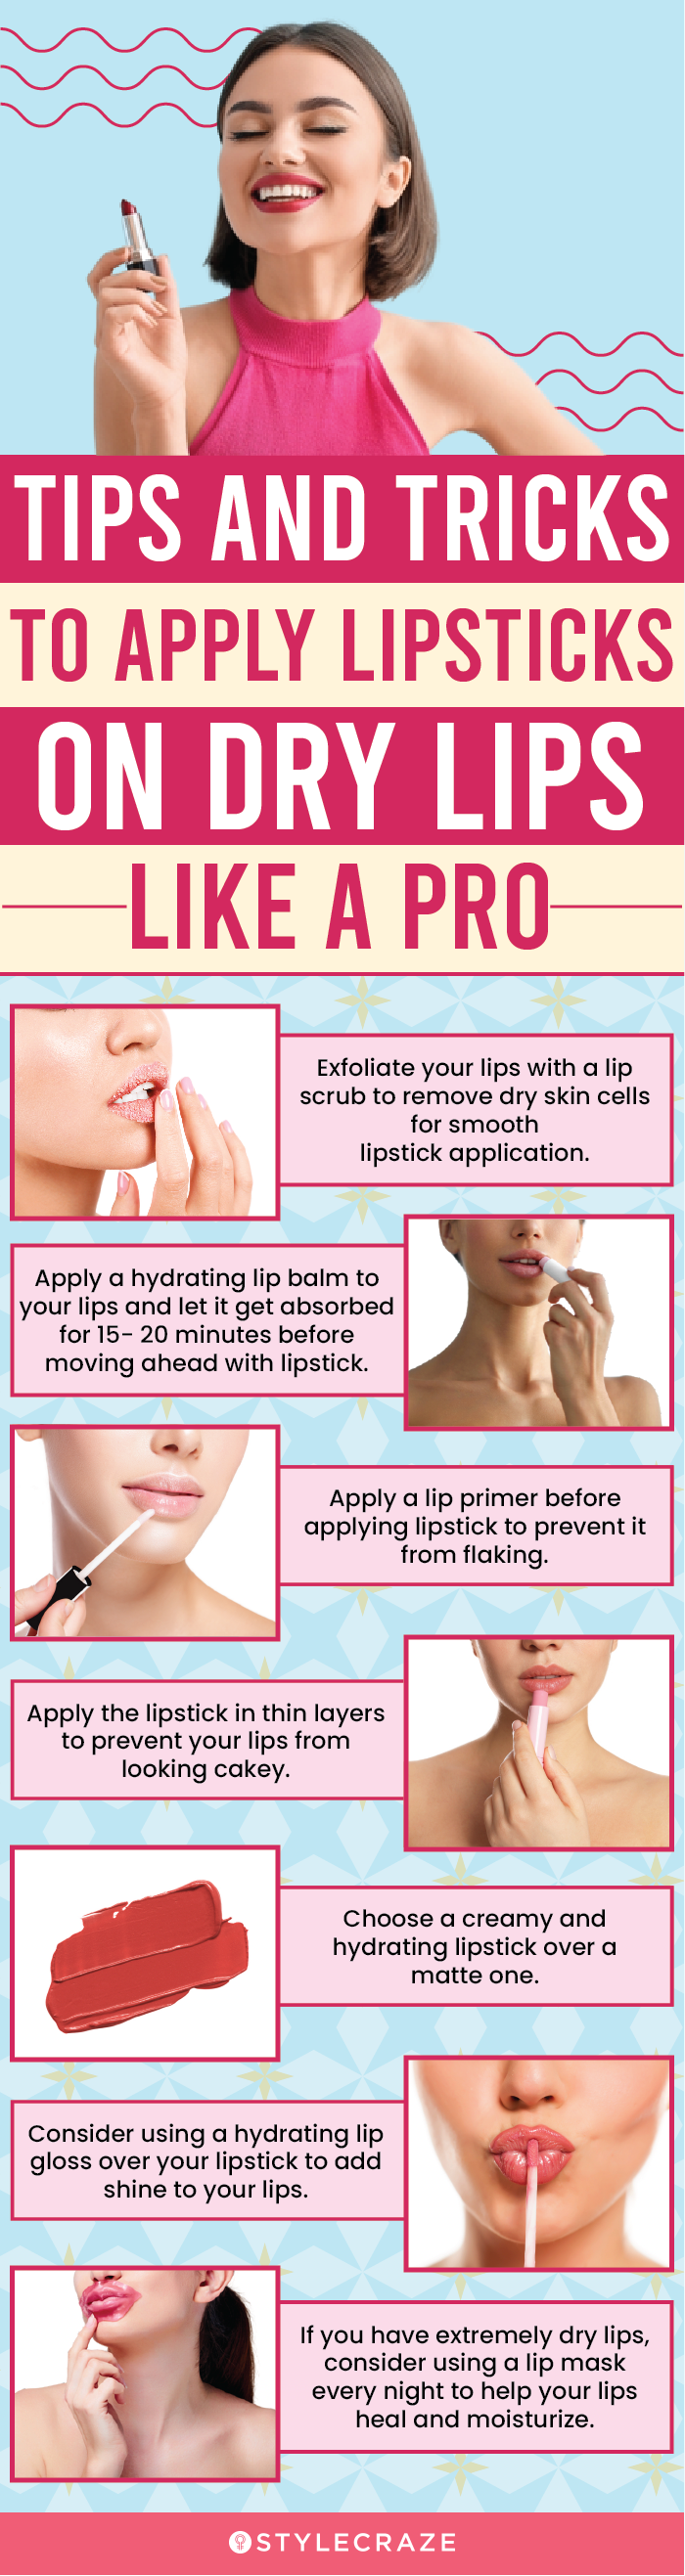 Tips And Tricks To Apply Lipsticks Like A Pro For Dry Lips